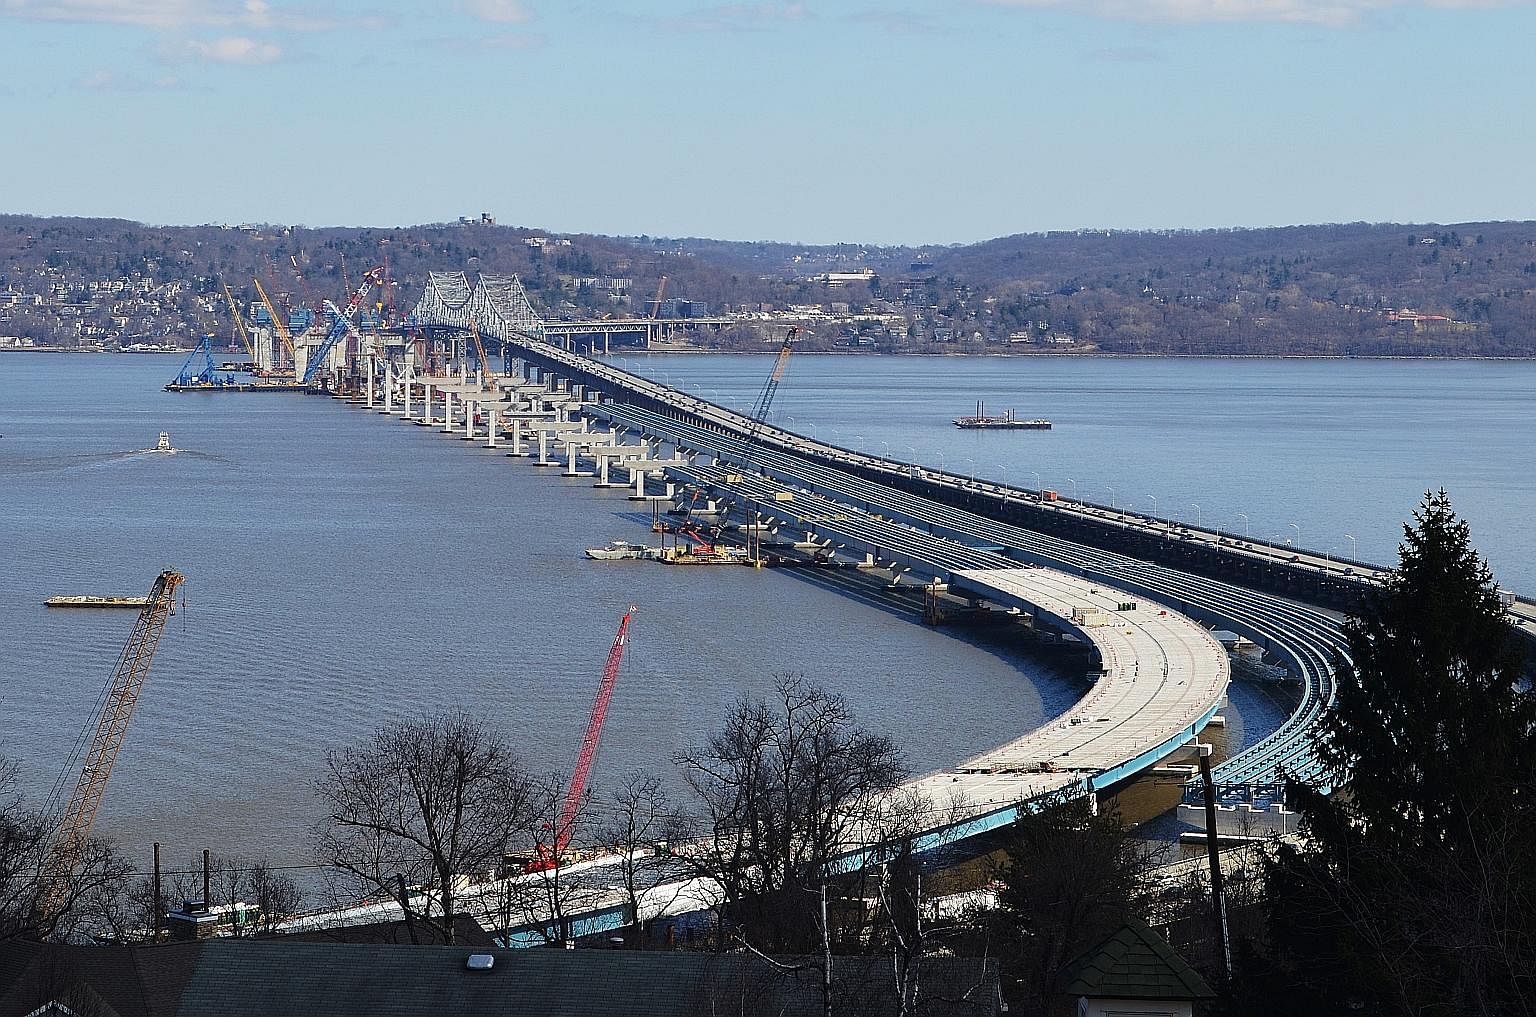 The New NY Bridge, to be completed next year, will replace the Tappan Zee Bridge over the Hudson River, built in 1955.